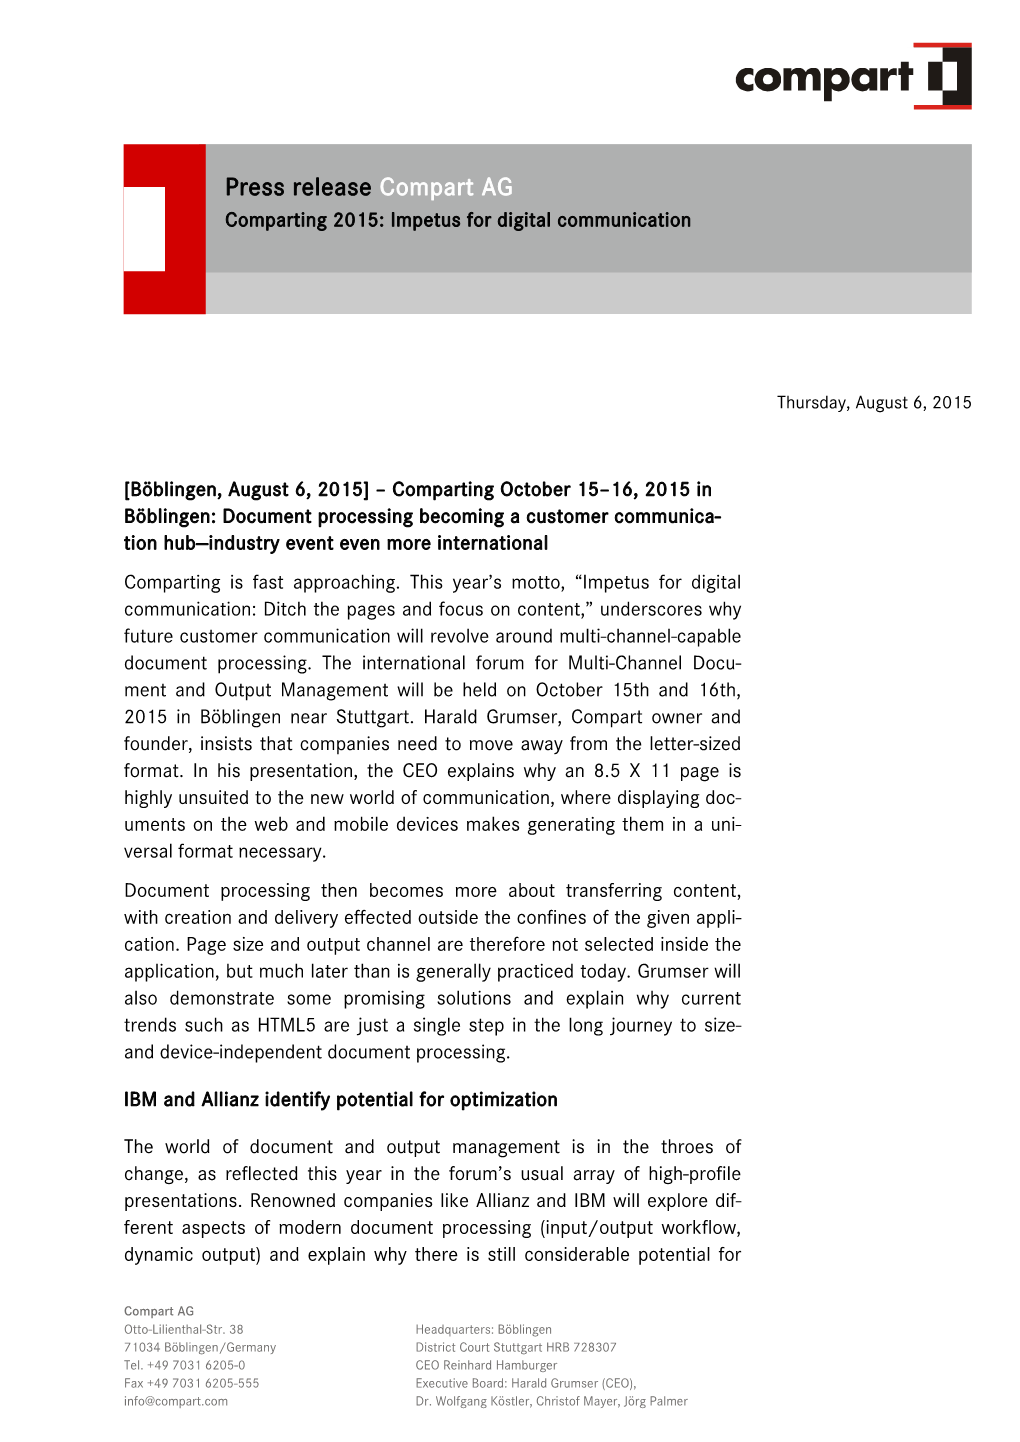 Press Release Compart AG Comparting 2015: Impetus for Digital Communication